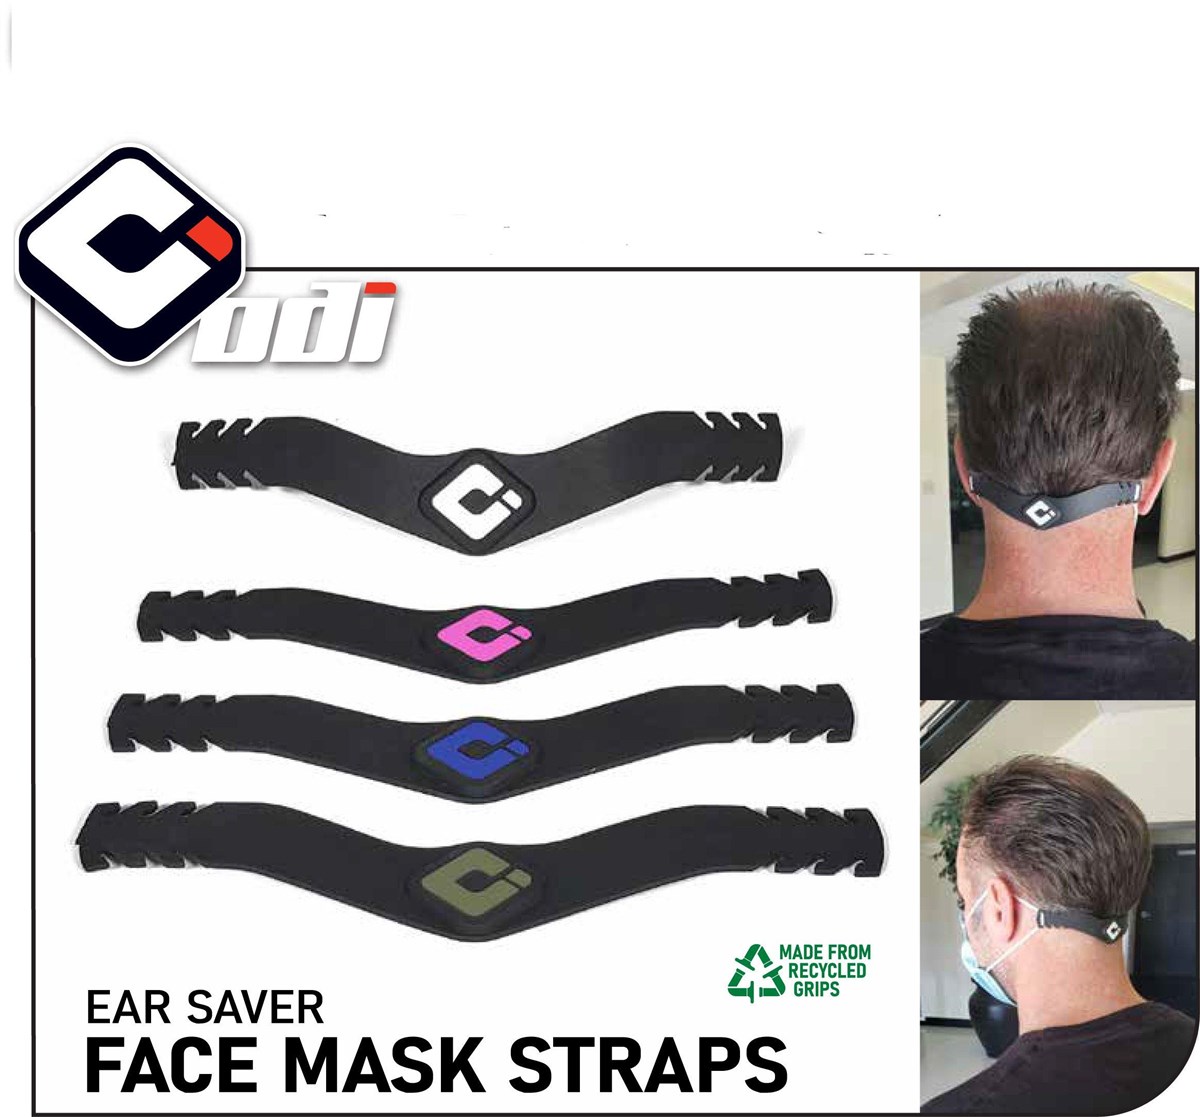 ODI Face Mask Straps (Pack of 5) product image